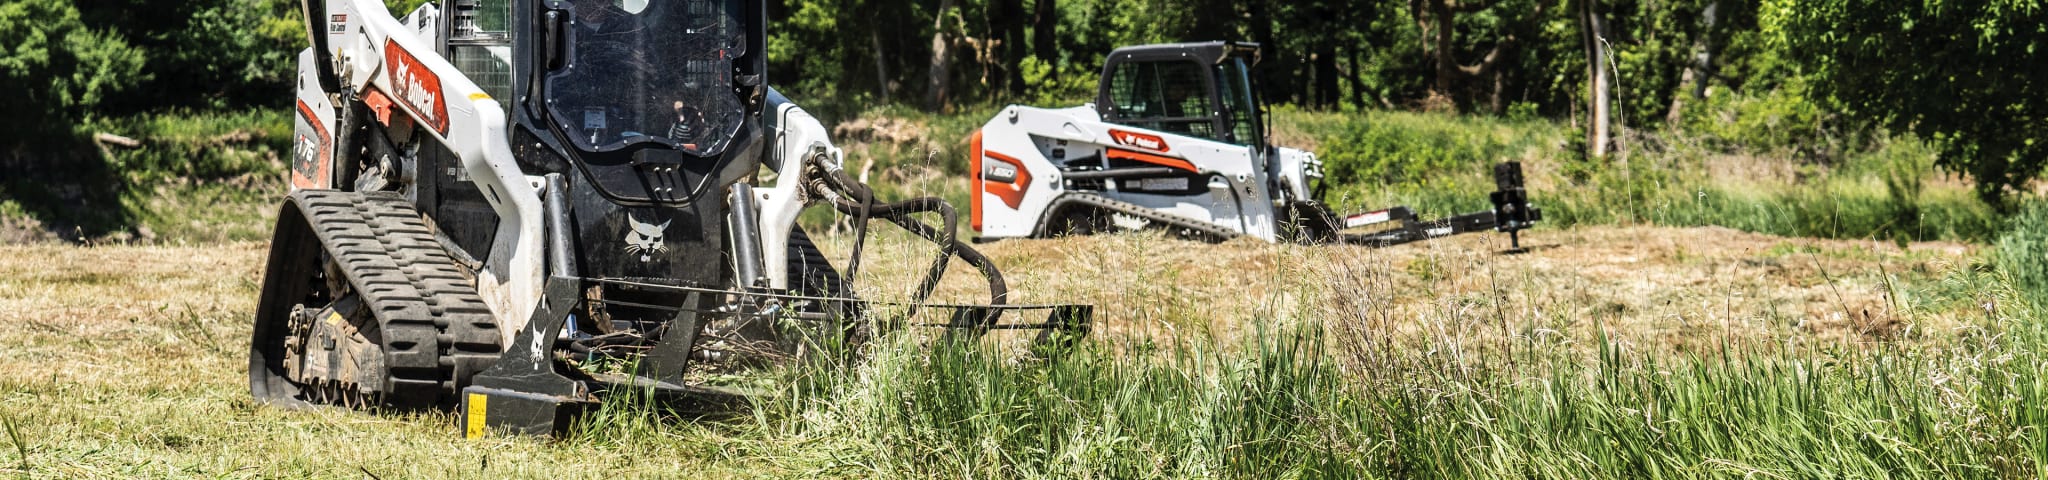 A Bobcat T76 With Brush Cutter Attachment Cuts Down Tall Vegetation 